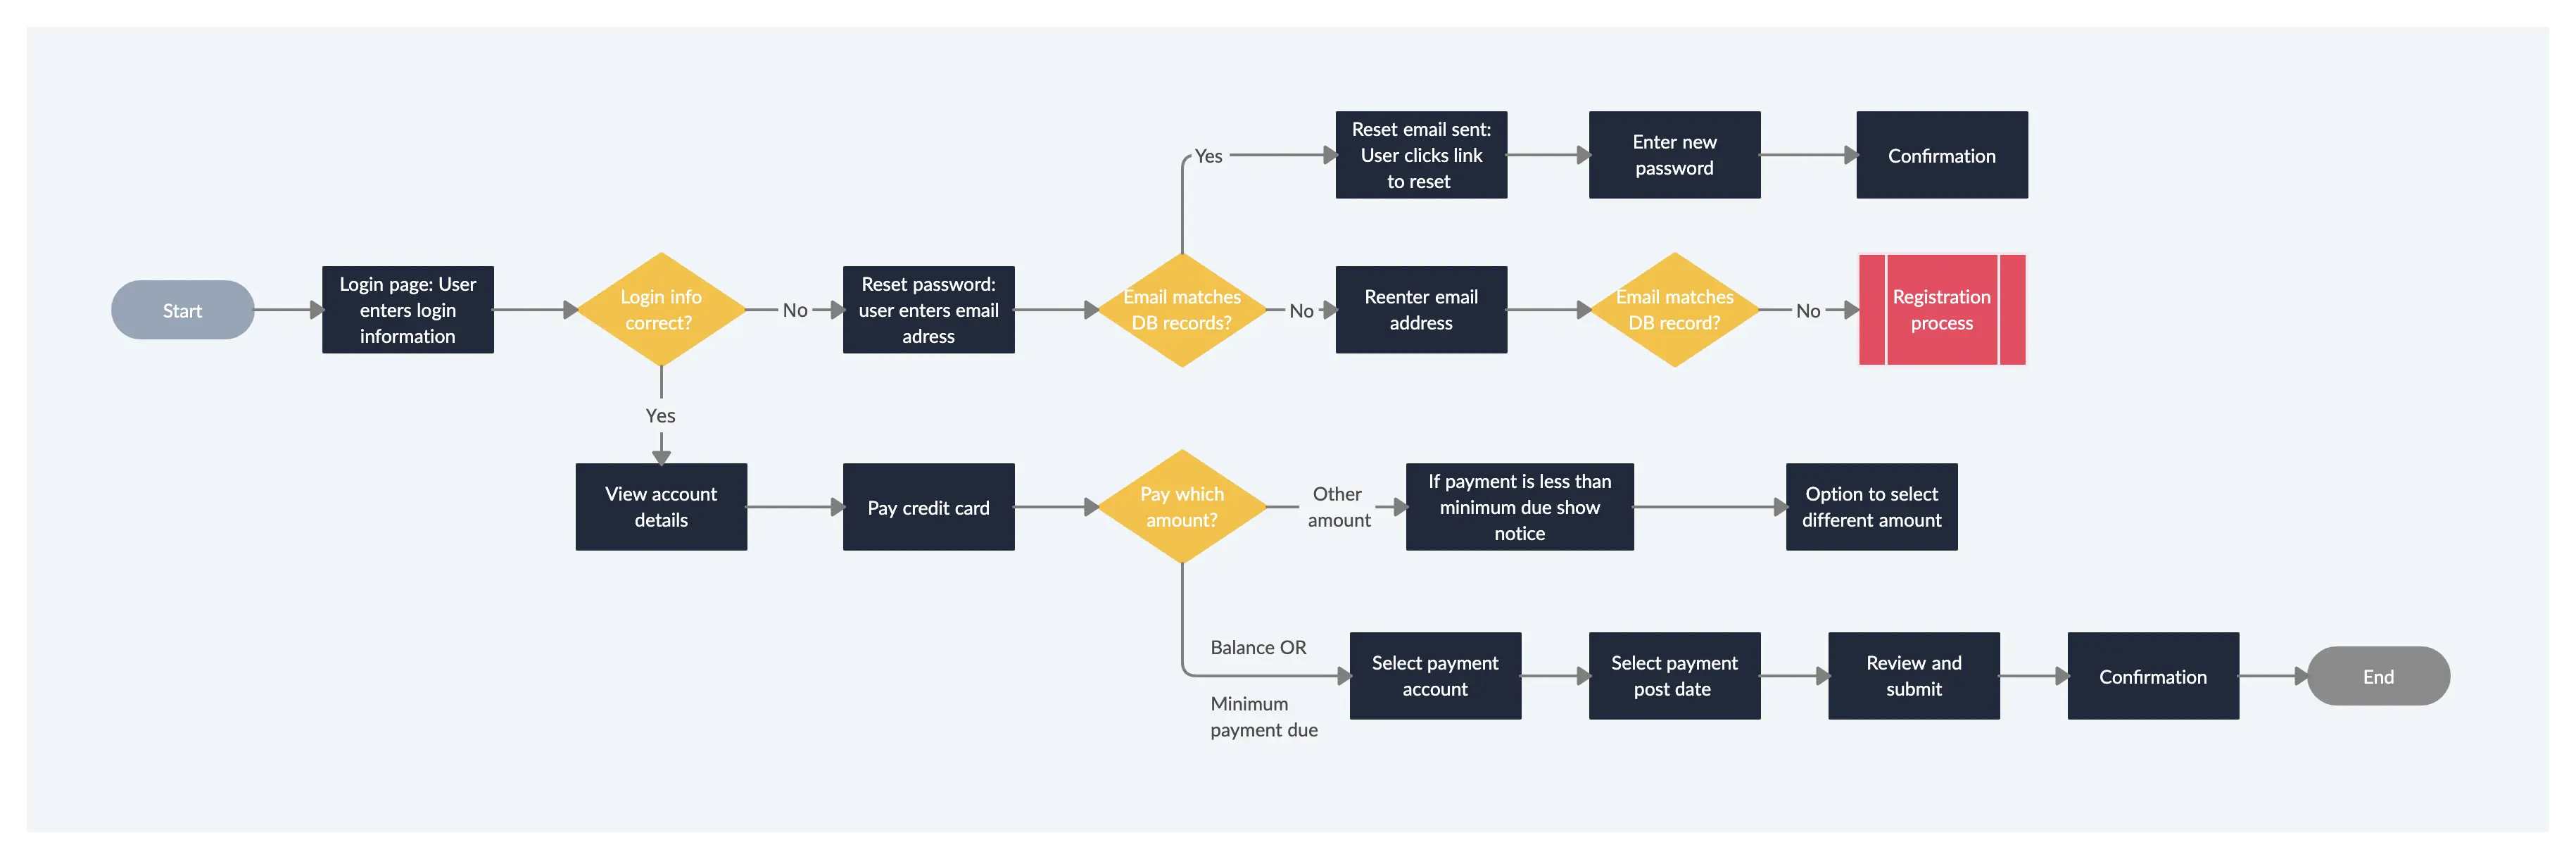 Rapid online user flow mapping & UX design tool